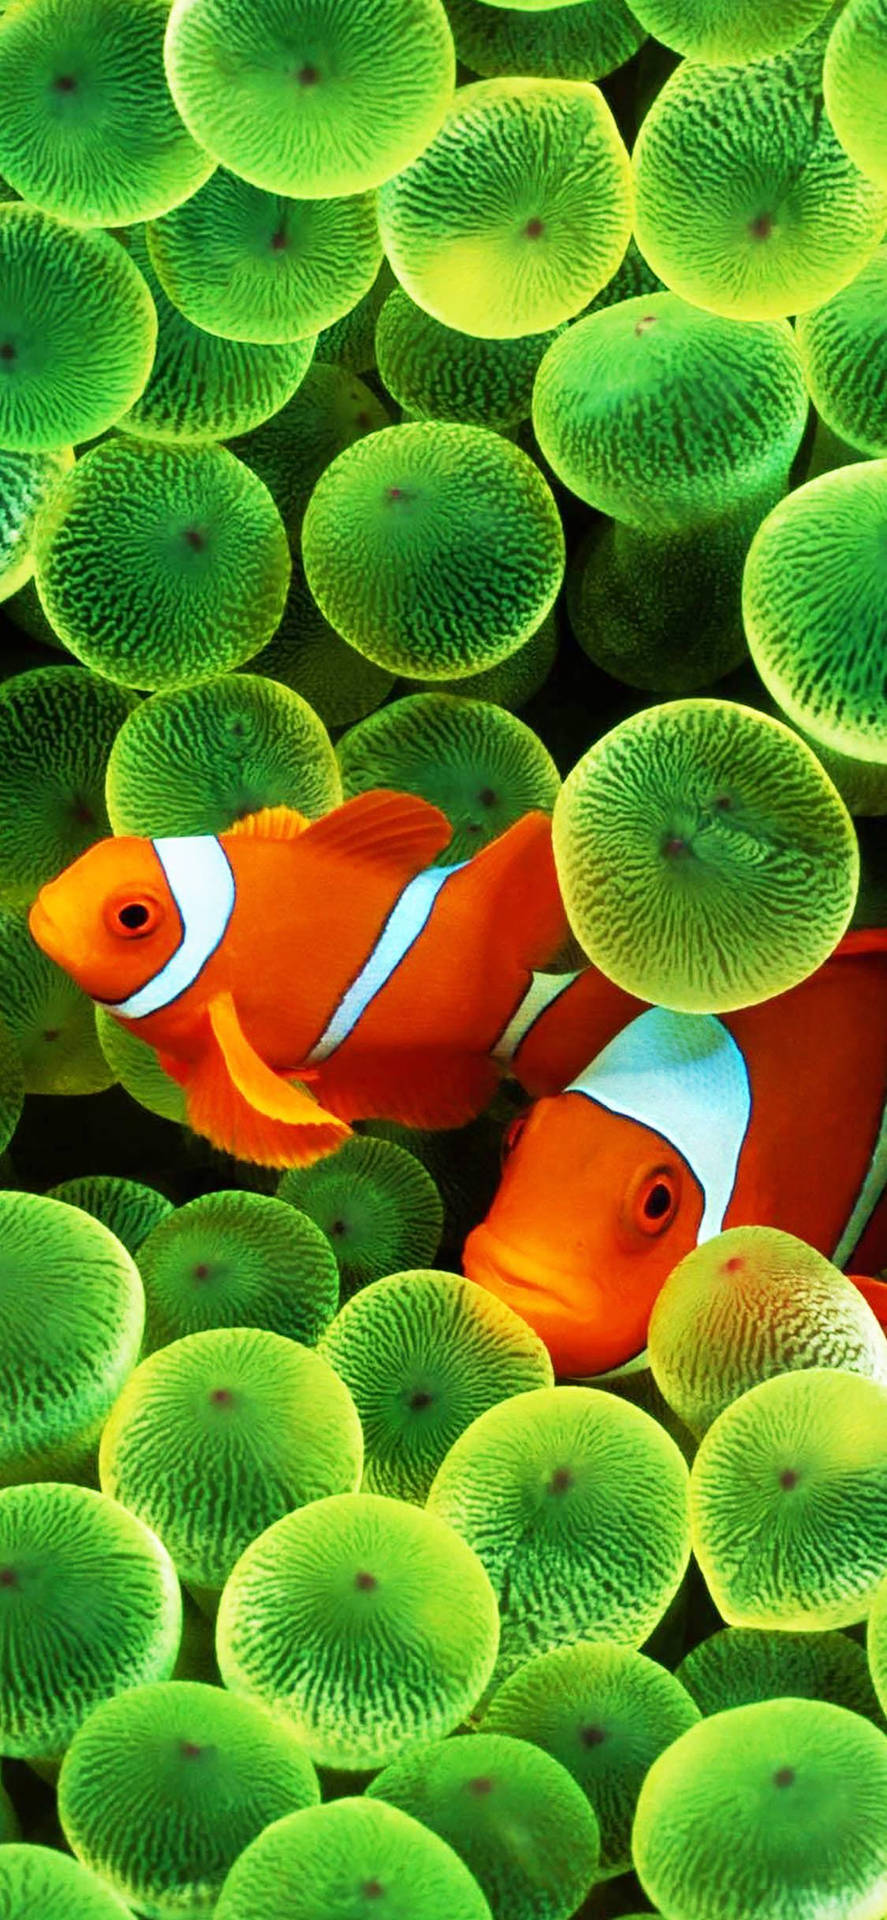 Vibrant Oled Display Of Clown Fish On Iphone Background